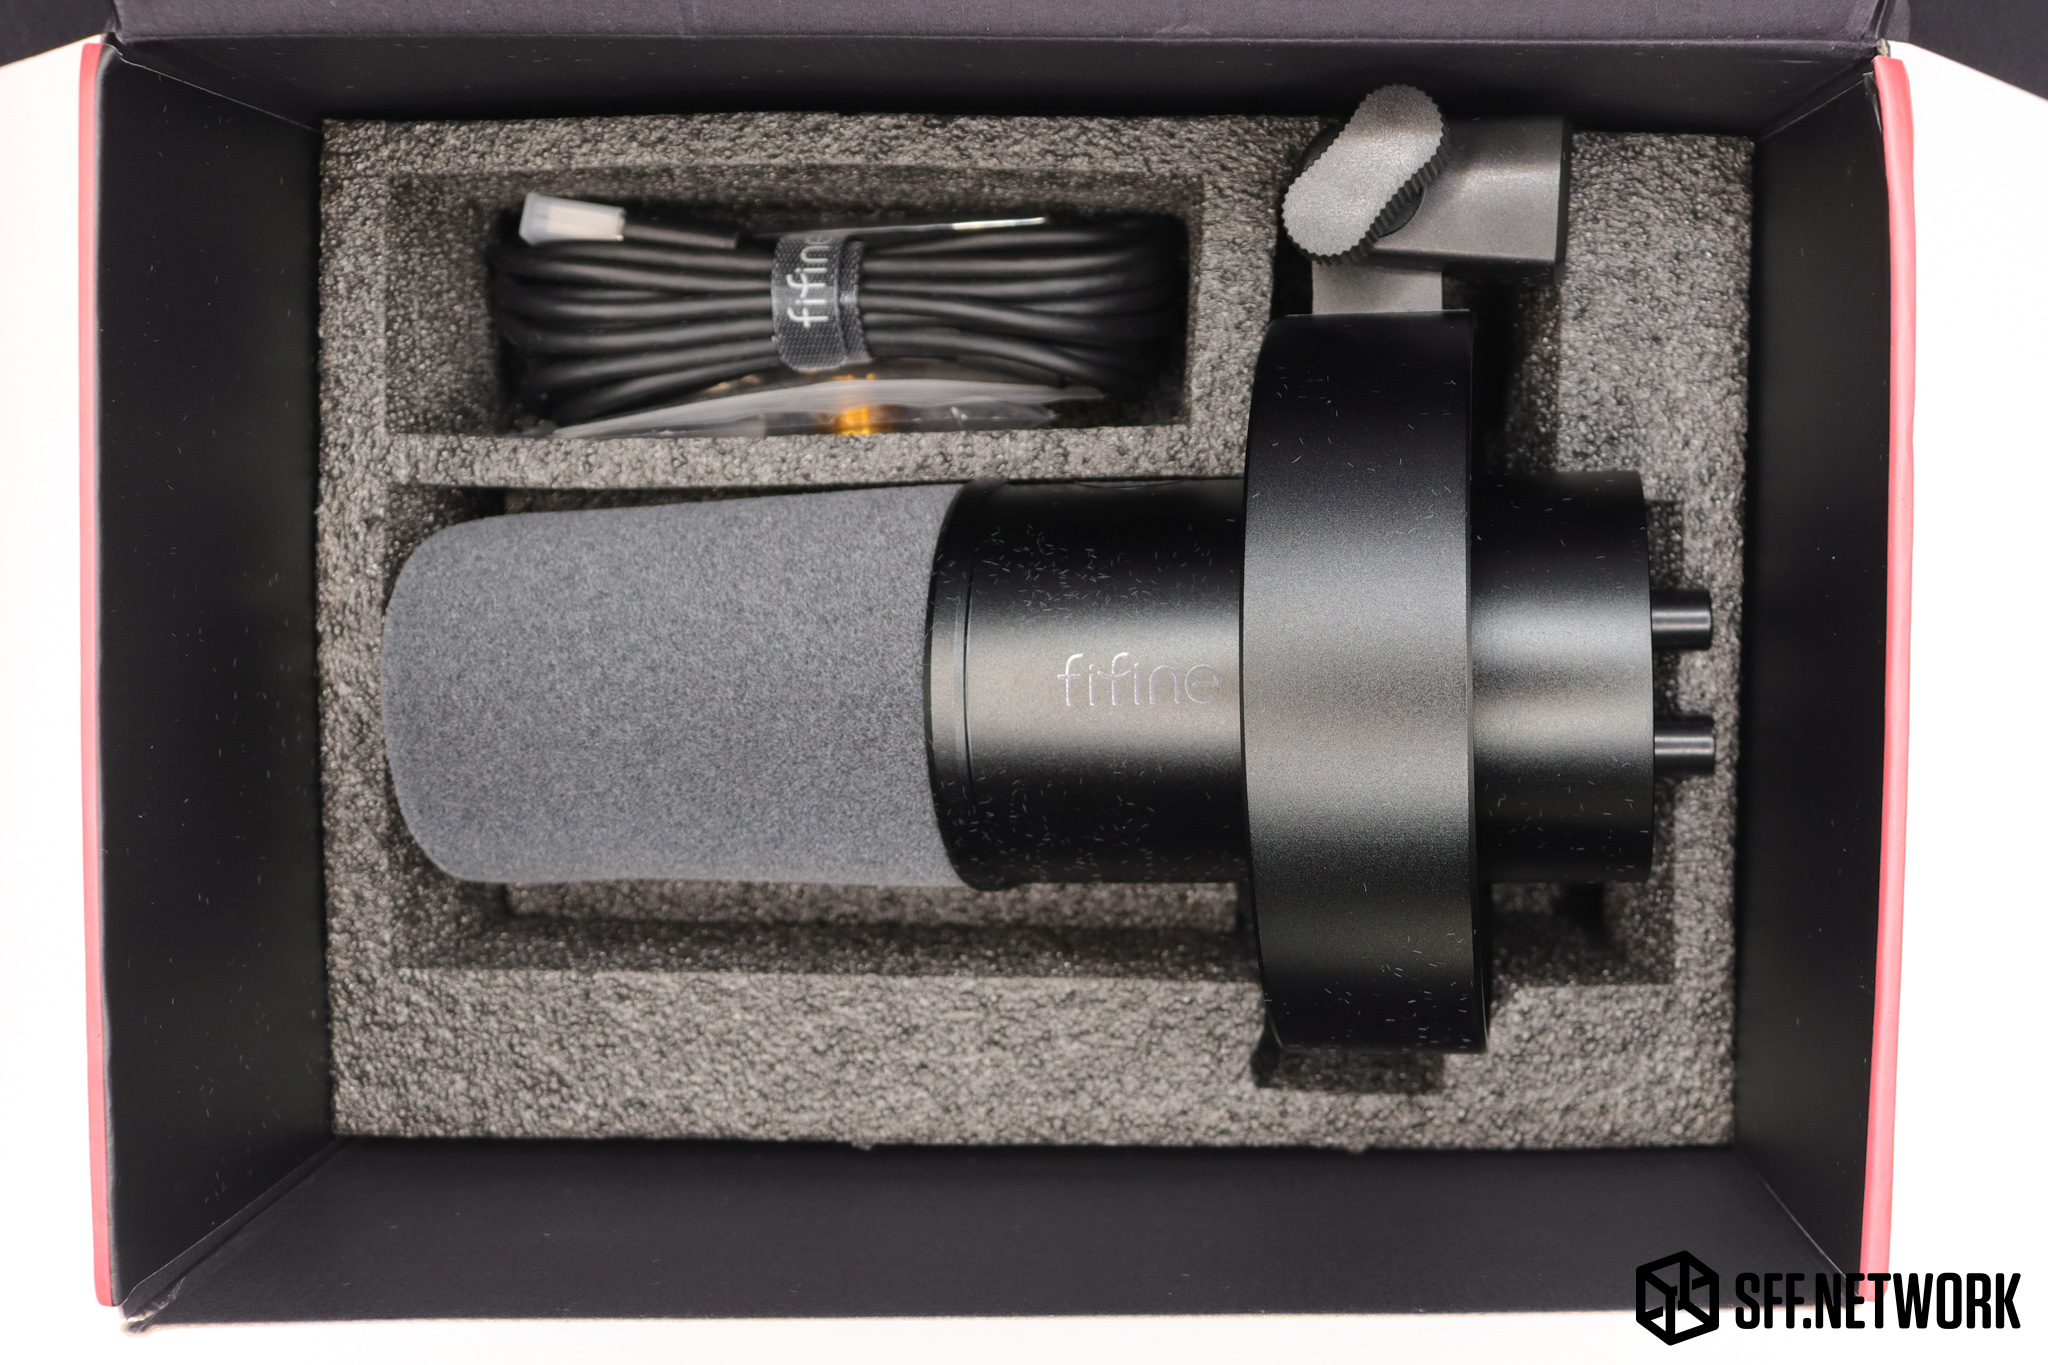 FIFINE's K688 USB/XLR Microphone – Streamer's Special or Bargain Basement?  – SFF.Network